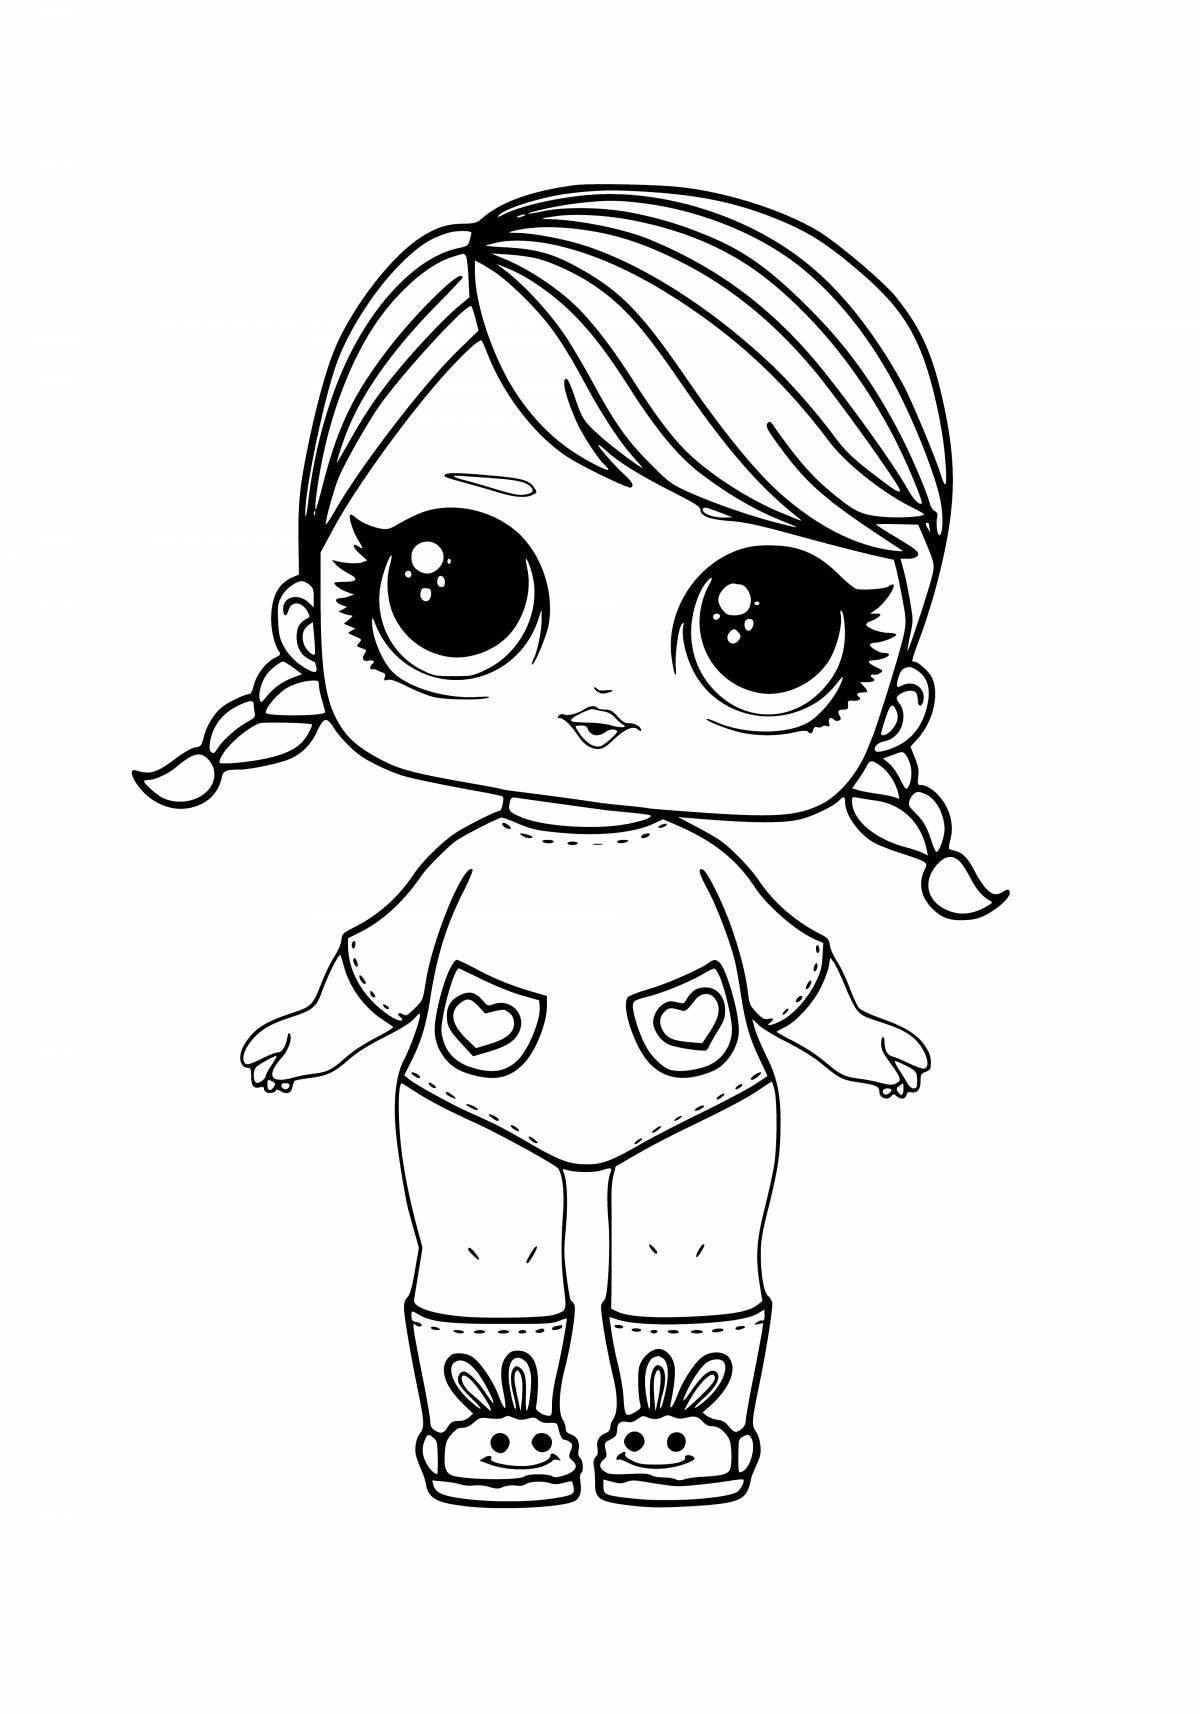 Fun coloring book for dolls